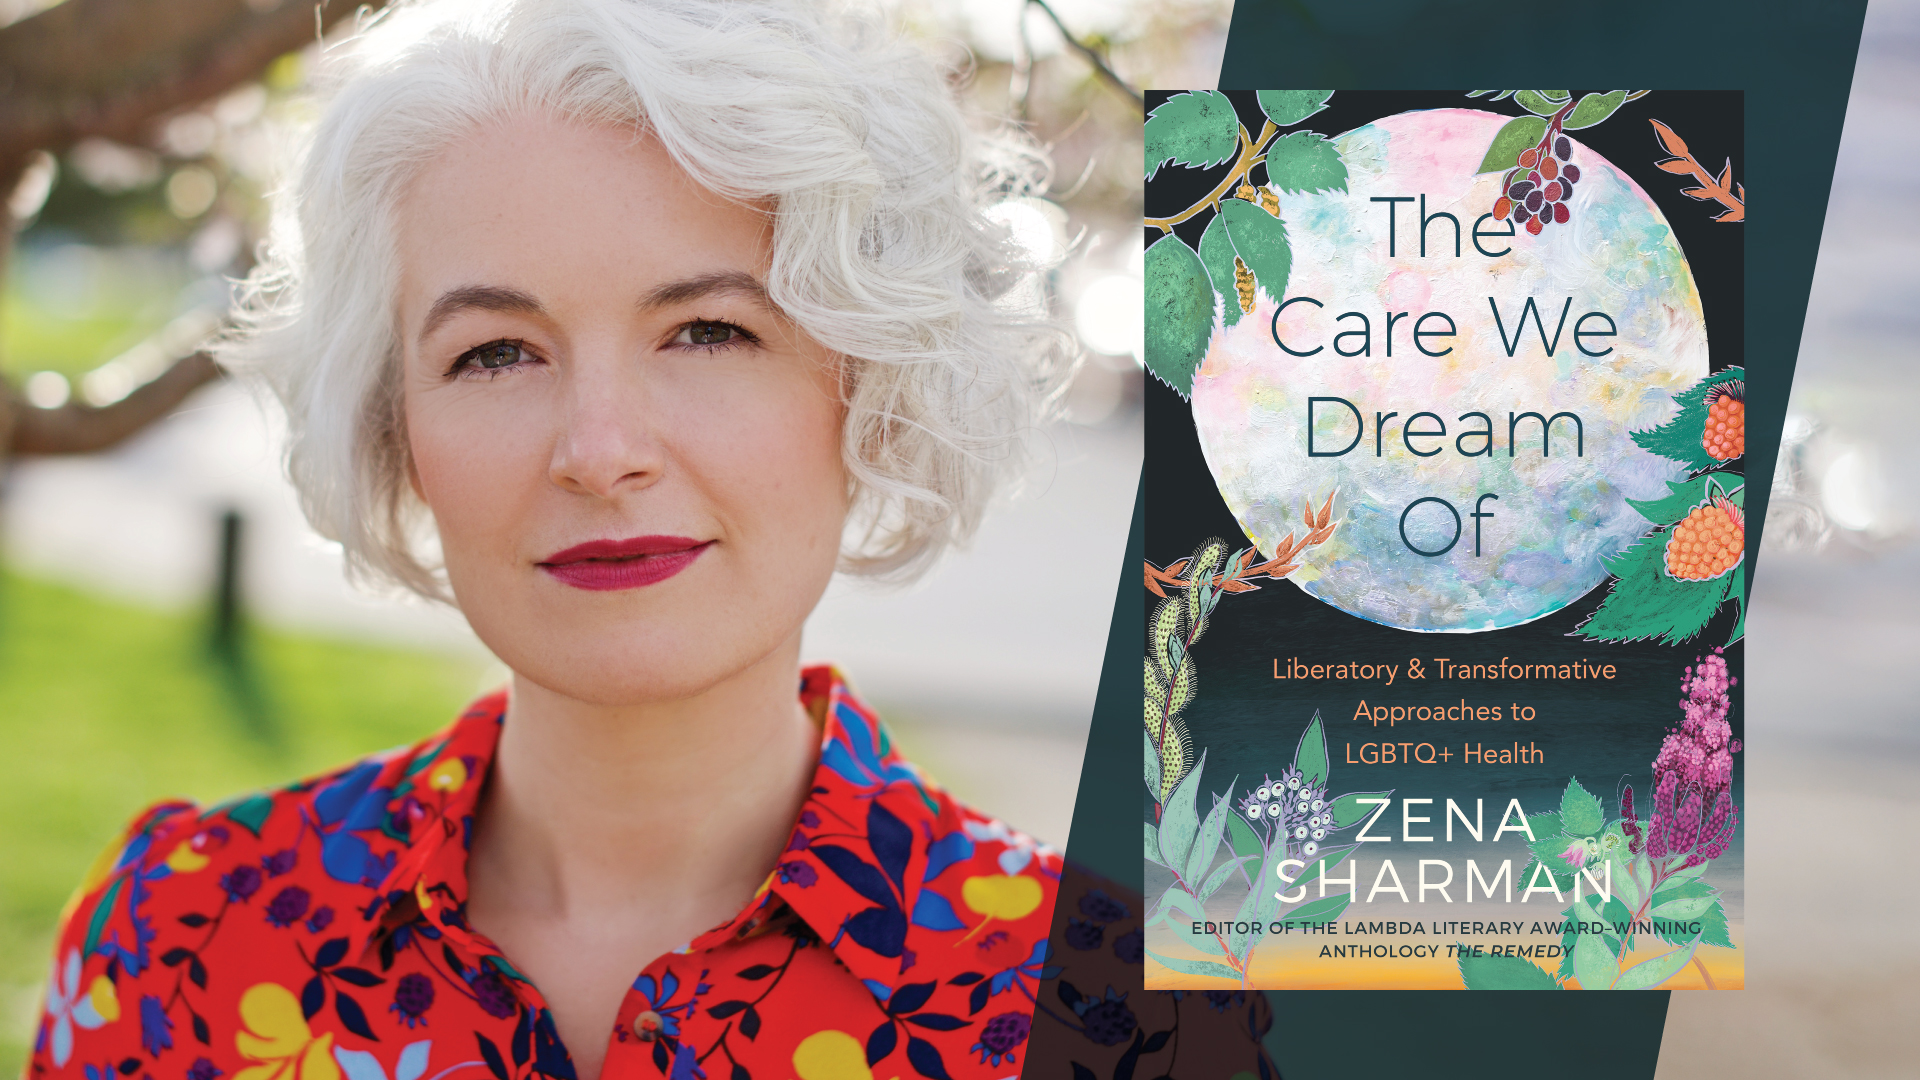 The Care We Dream Of by Zena Sharman